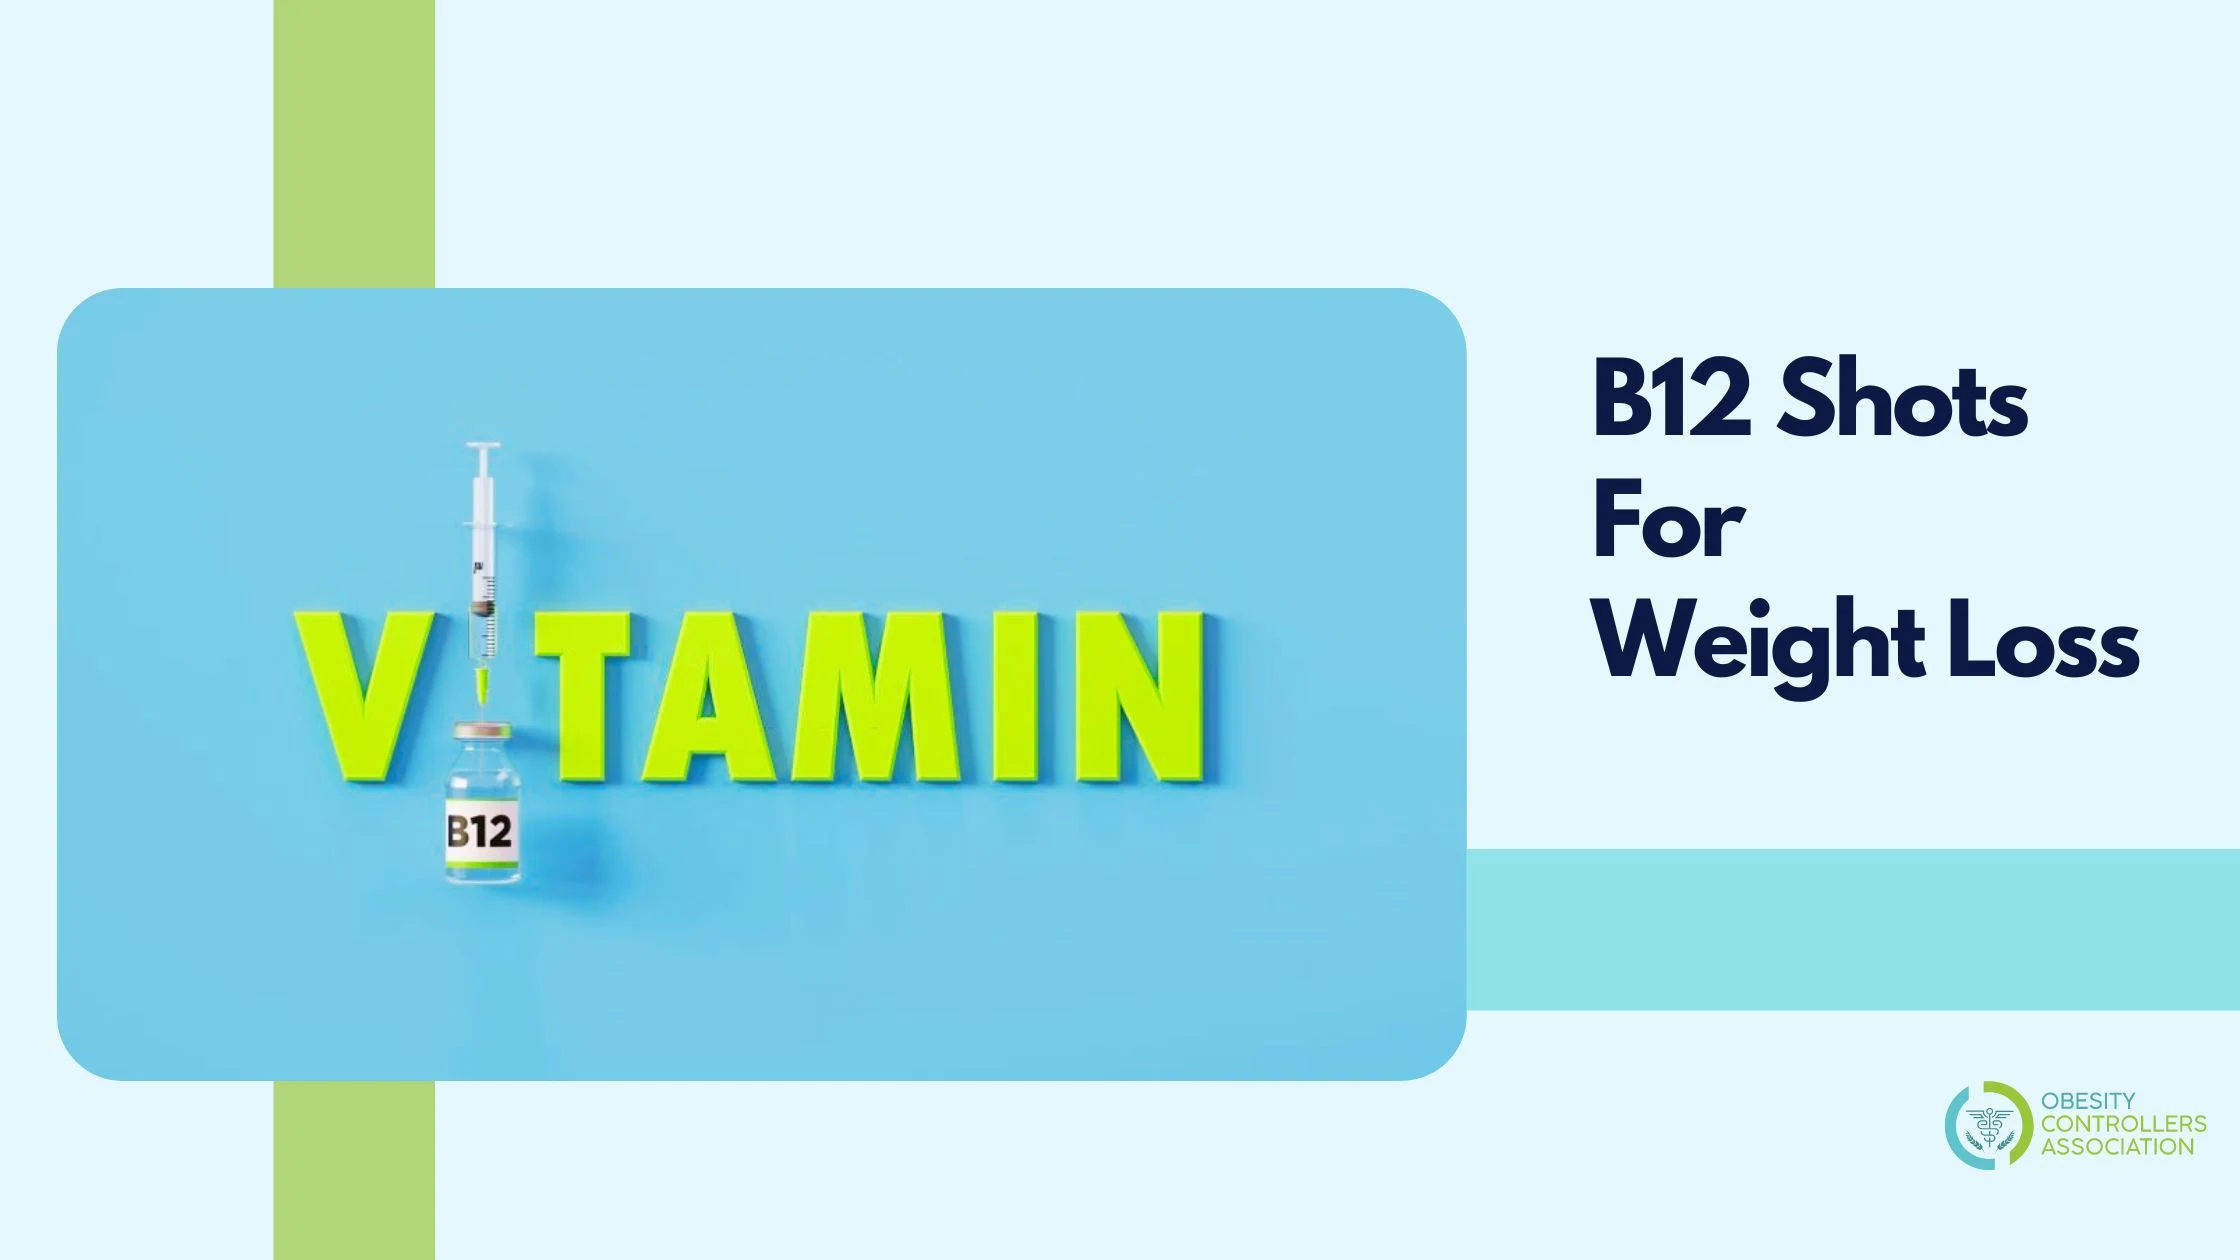 B12 Shots For Weight Loss